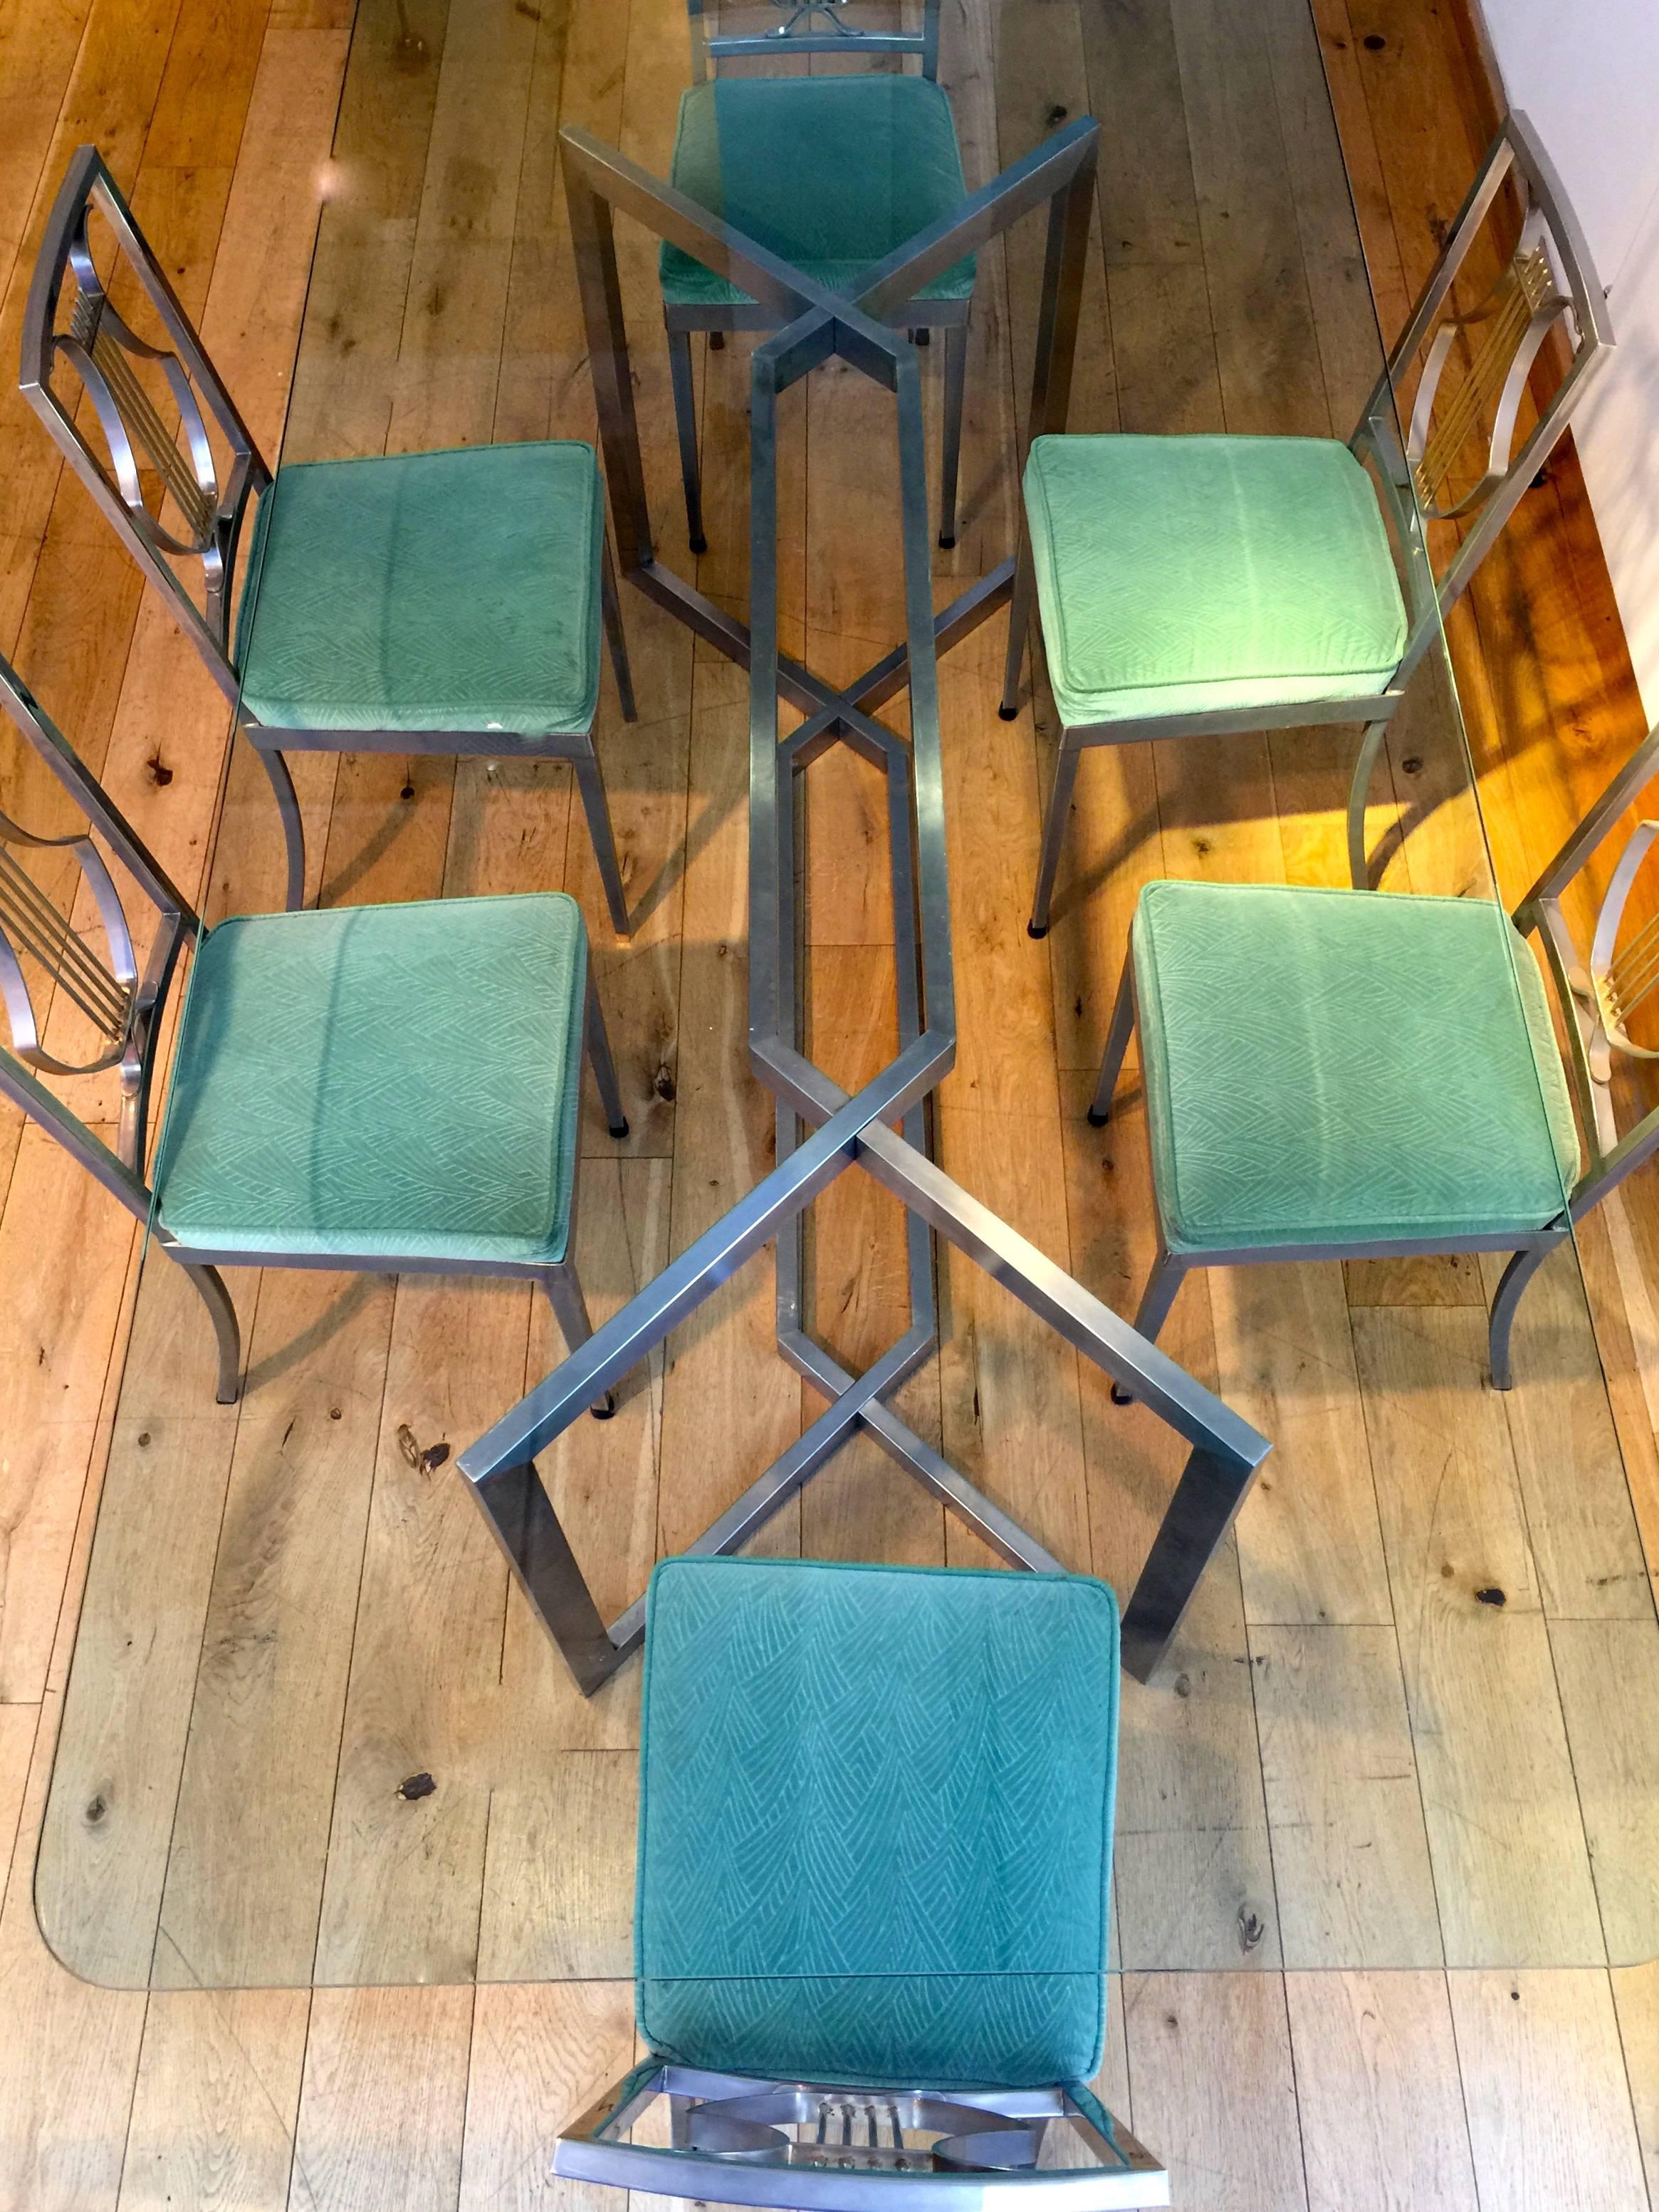 Brushed stainless steel dining table by Paul Legeard, for Dom, 1970s 
Set of six steel dining chairs, attributed to Maison Jansen, 1970s, with lyre back splats and seats covered in eau-de-nil fabric with stylised leaf frond design
NB The glass